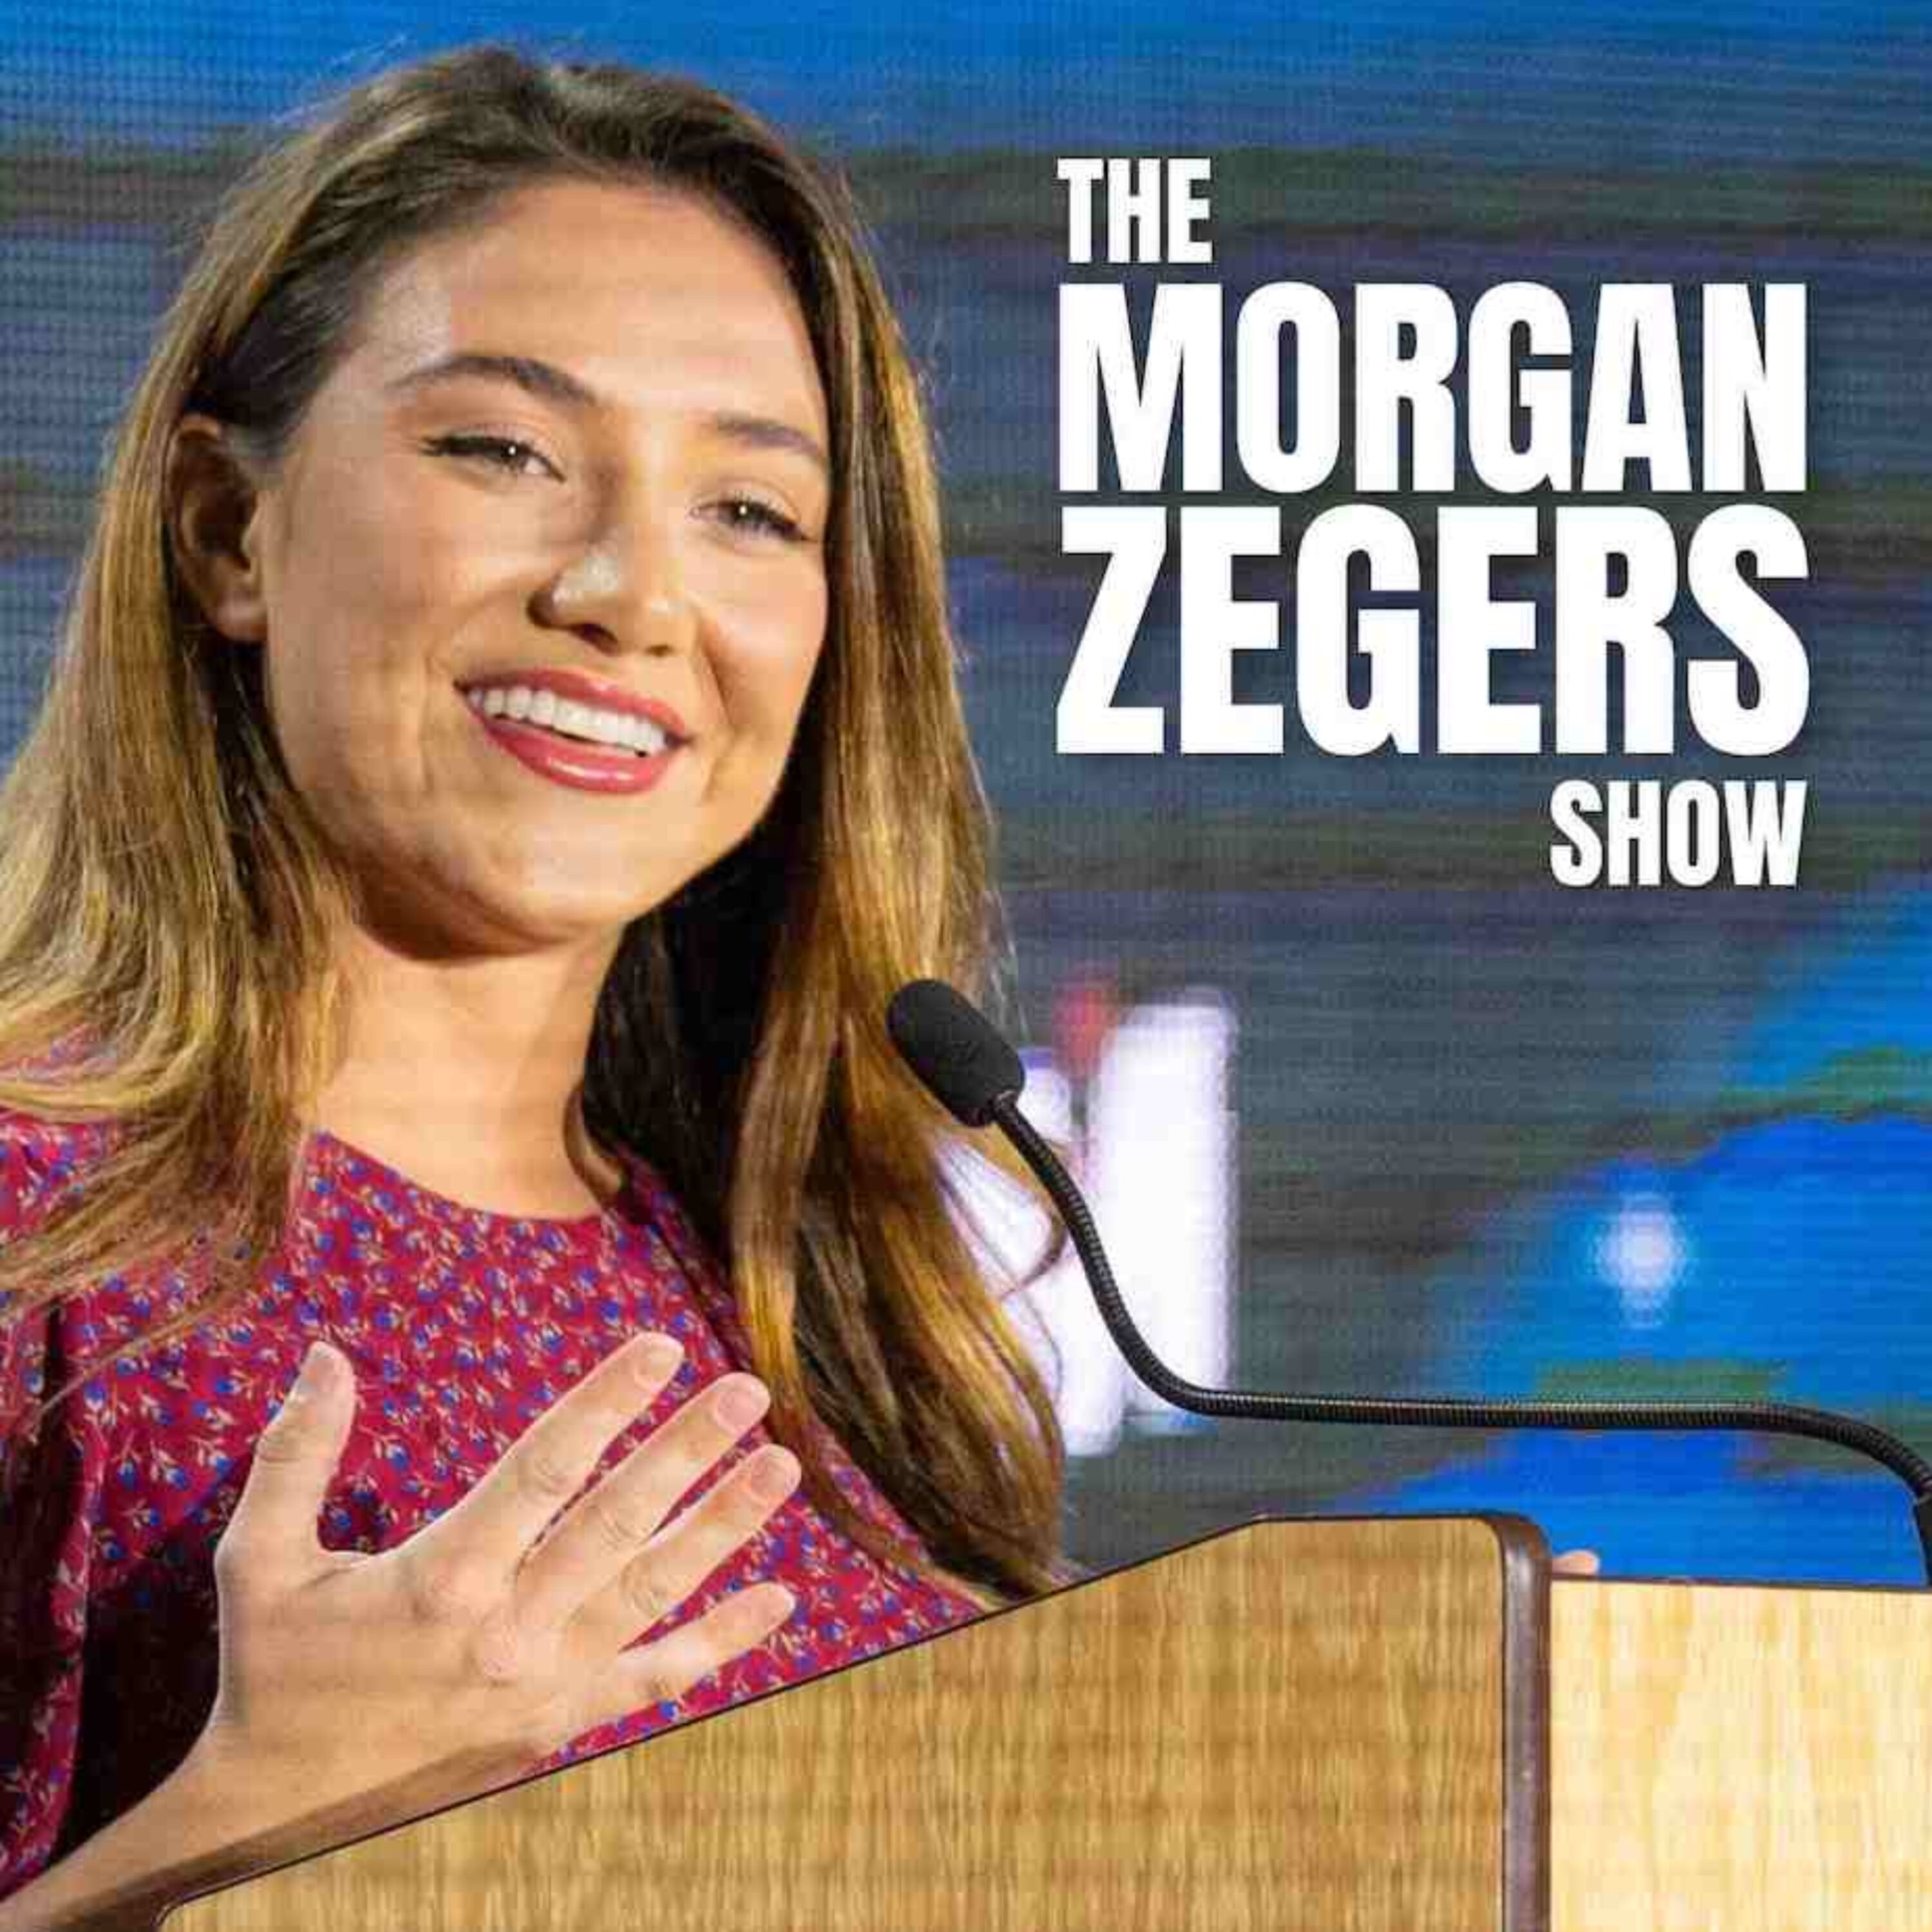 Fresh update on "adhd" discussed on The Morgan Zegers Show